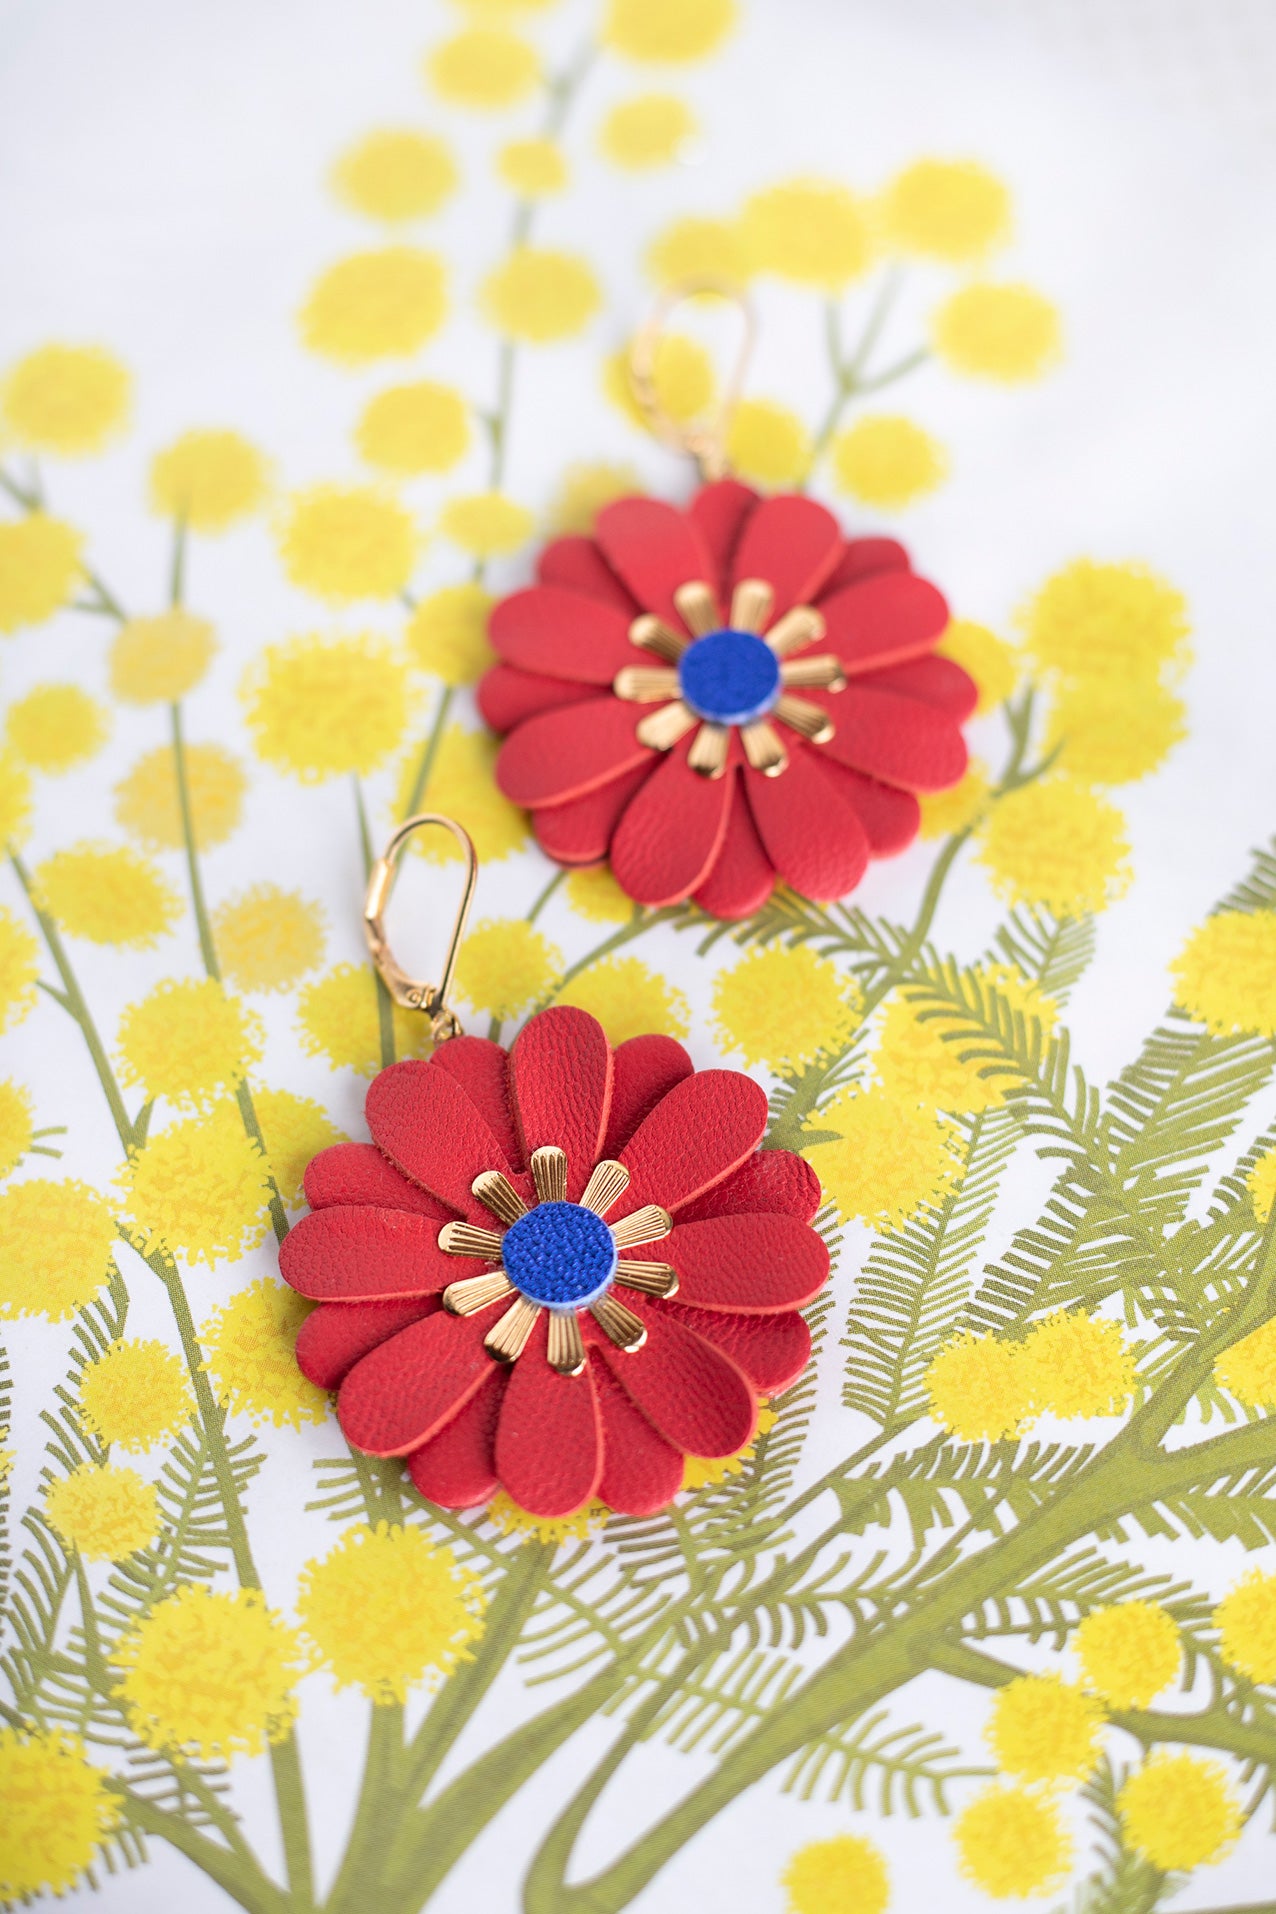 Zinnia flower earrings - bright red leather and metallic blue